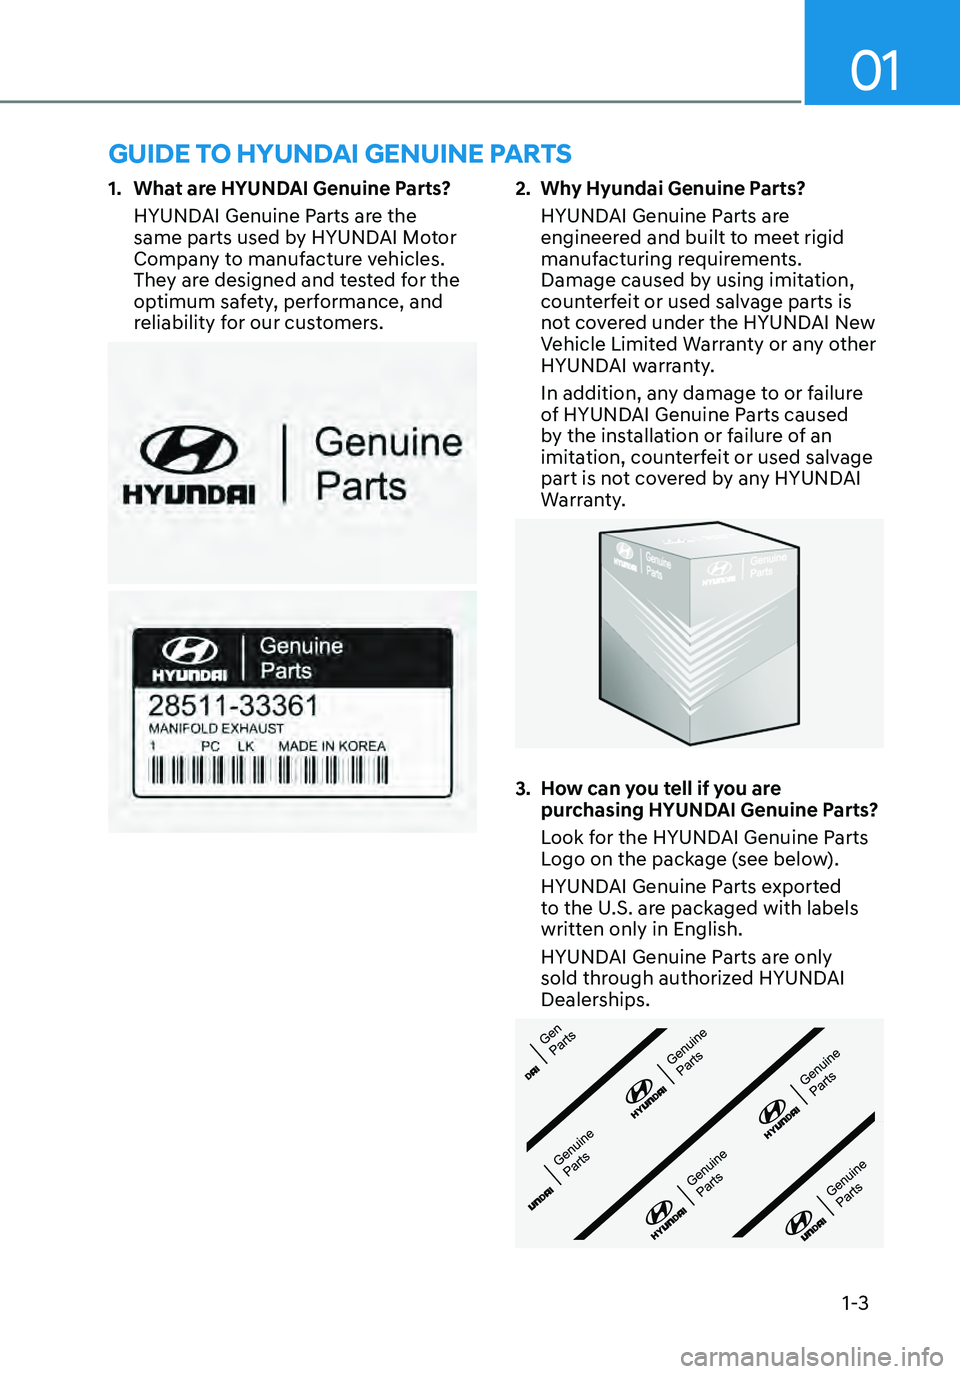 HYUNDAI ELANTRA HYBRID 2021  Owners Manual 01
1-3
1. What are HYUNDAI Genuine Parts?
HYUNDAI Genuine Parts are the 
same parts used by HYUNDAI Motor 
Company to manufacture vehicles. 
They are designed and tested for the 
optimum safety, perfo